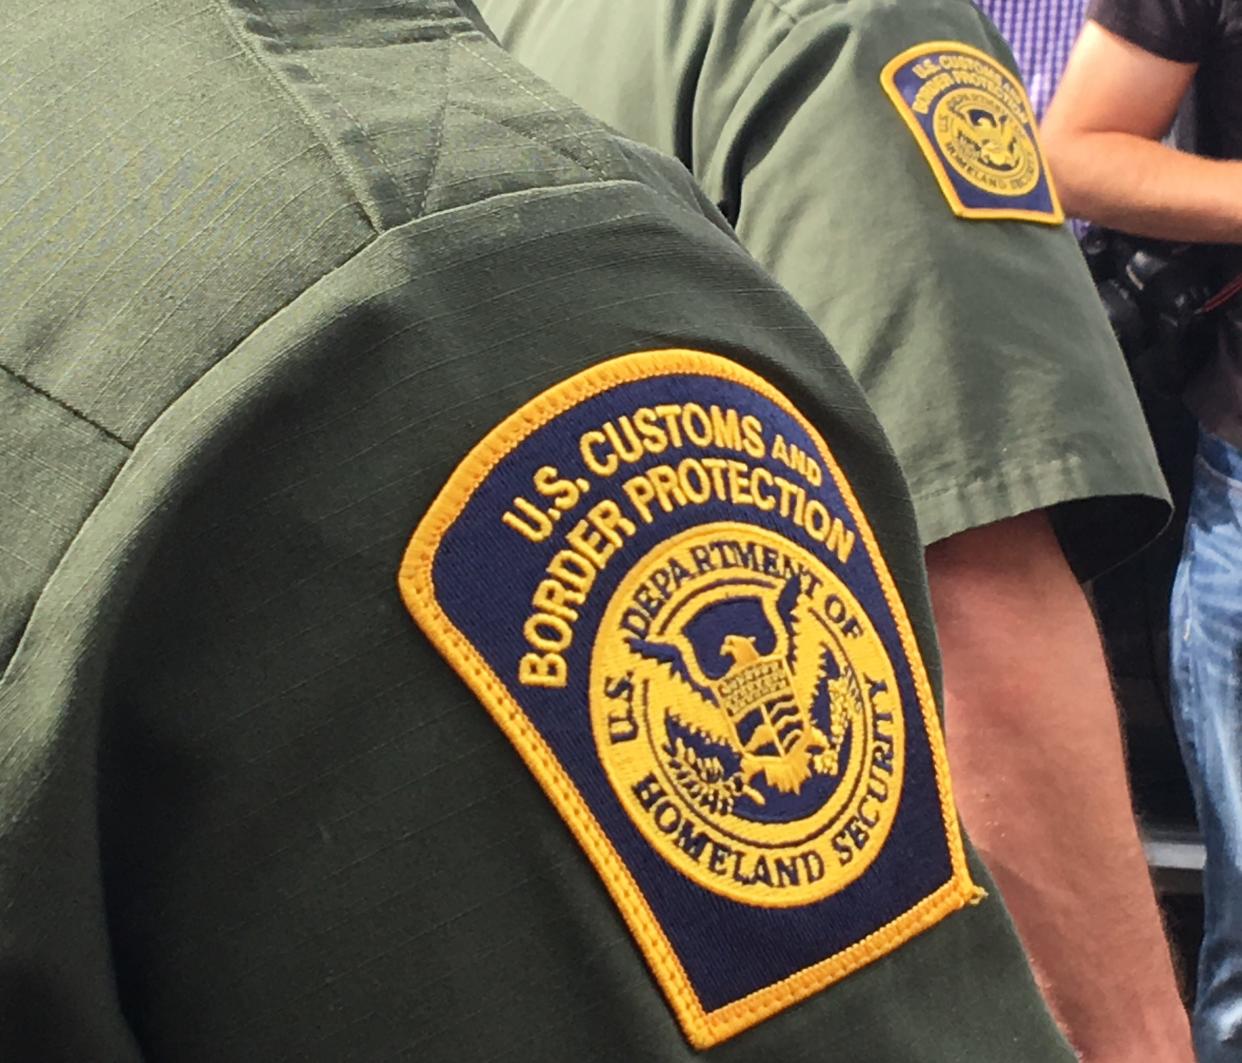 The U.S. Border Patrol is part of U.S. Customs and Border Protection, a component of the U.S. Department of Homeland Security.